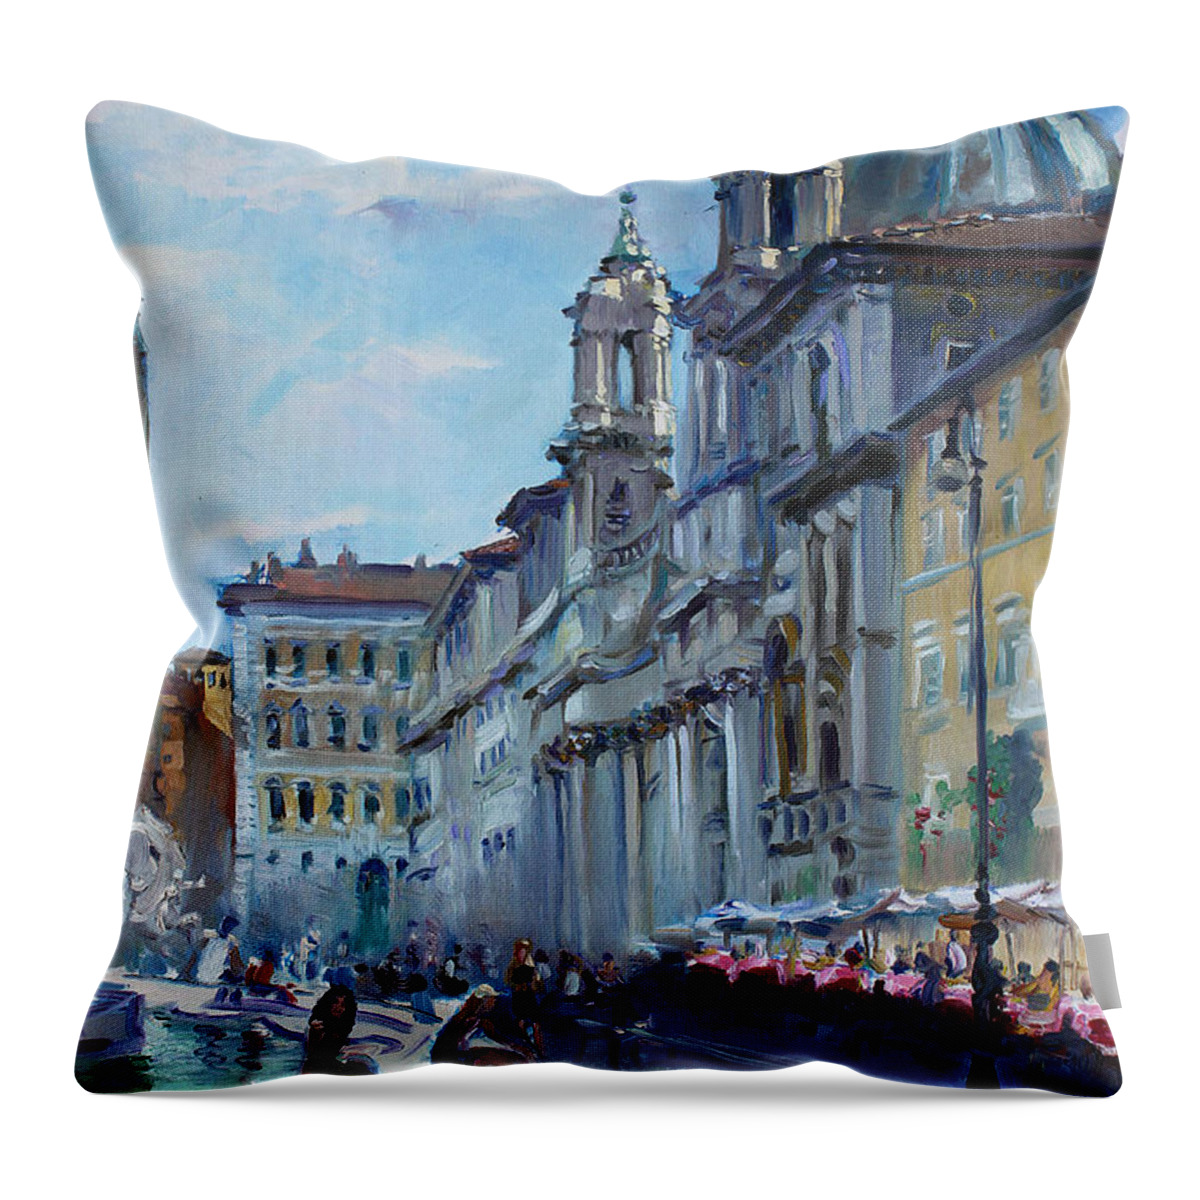 Italy Throw Pillow featuring the painting Rome Piazza Navona by Ylli Haruni